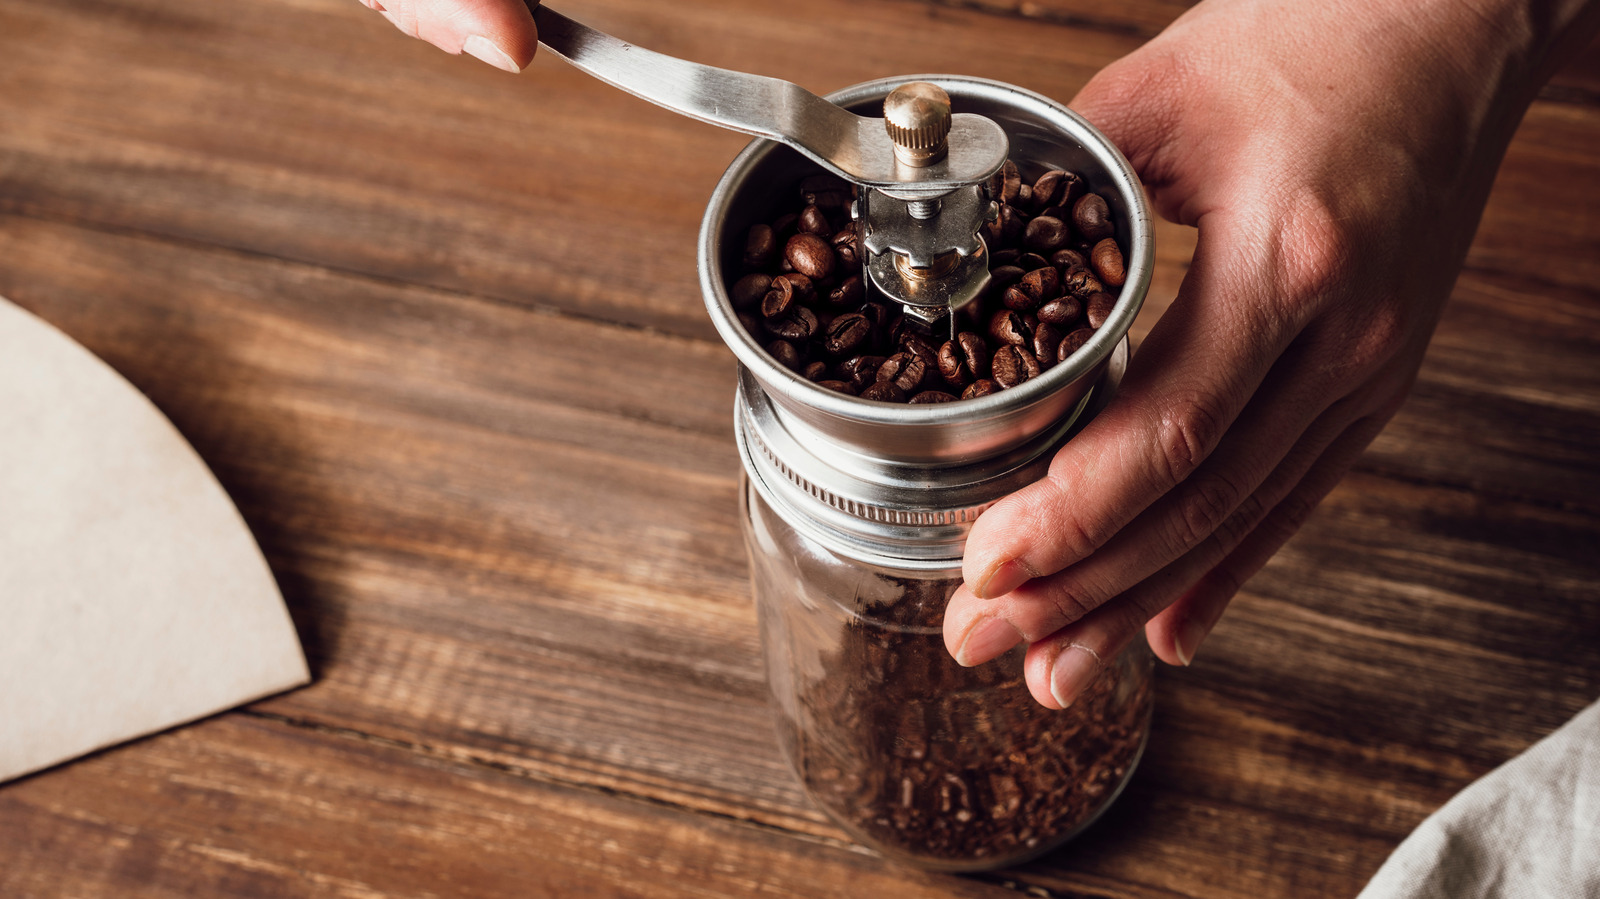 Is A Fine Grind Better For French Press Coffee? - Perfect Daily Grind